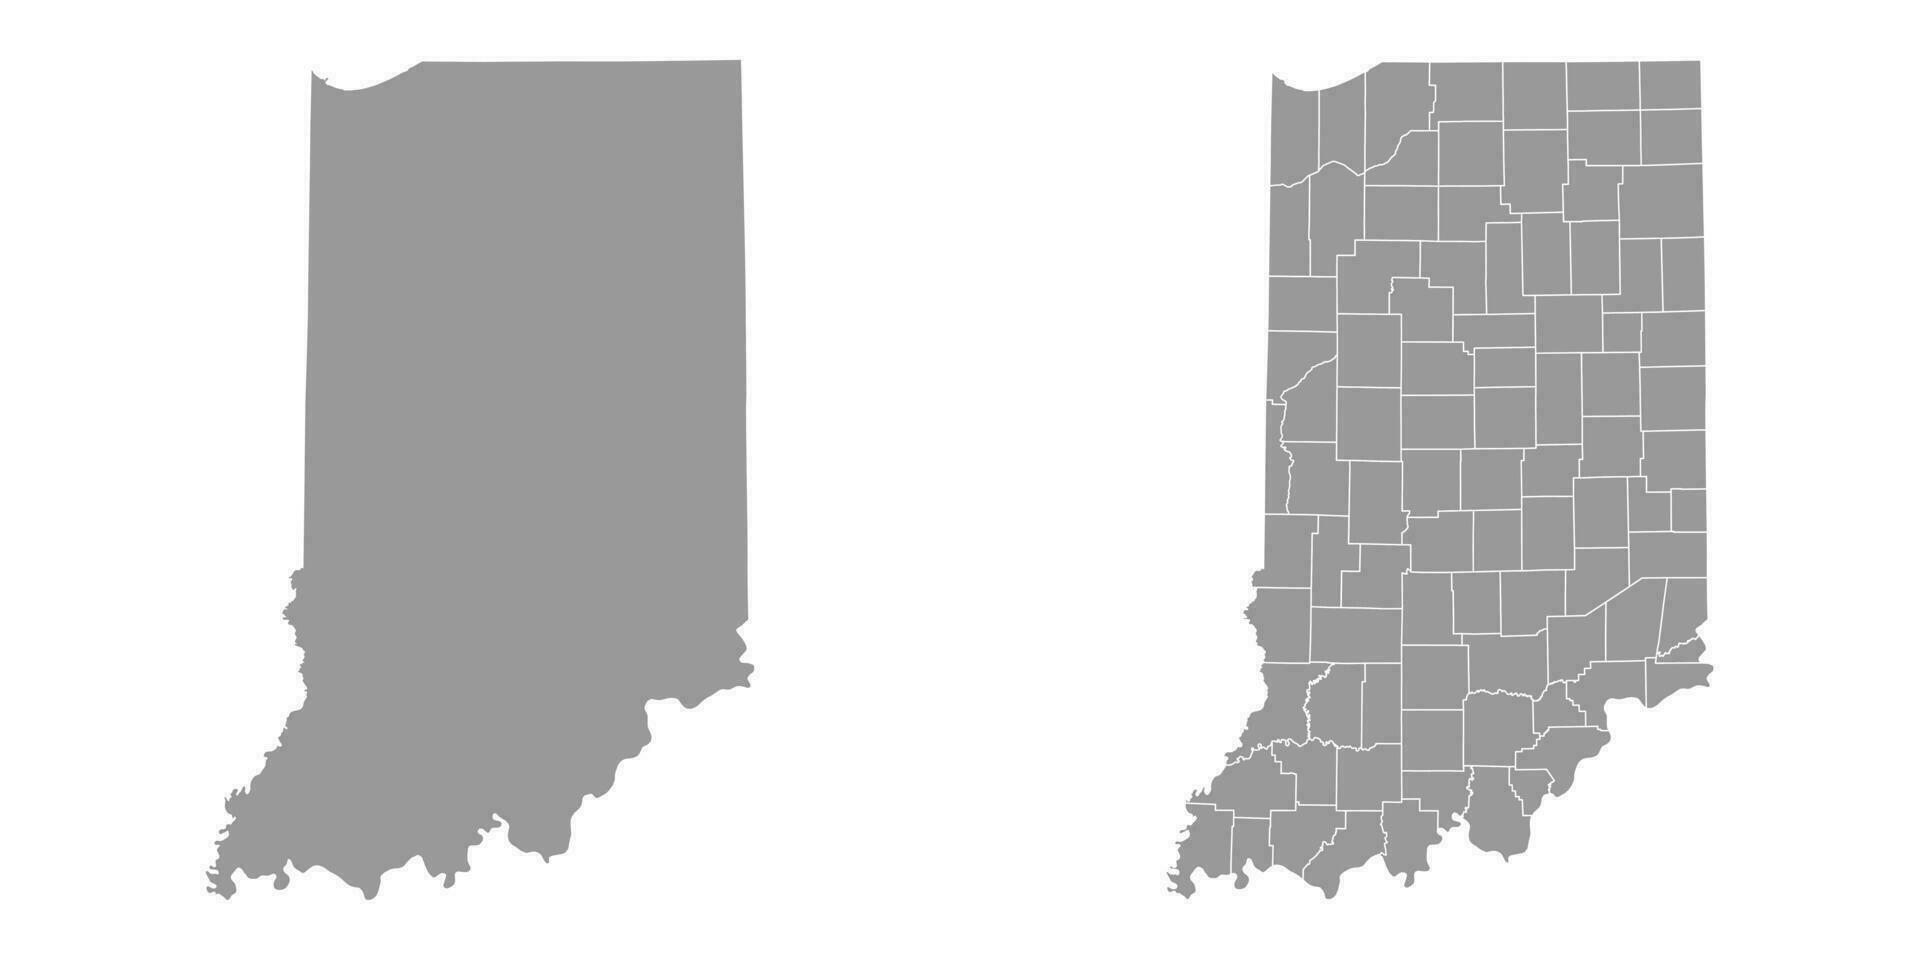 Indiana state gray maps. Vector illustration.